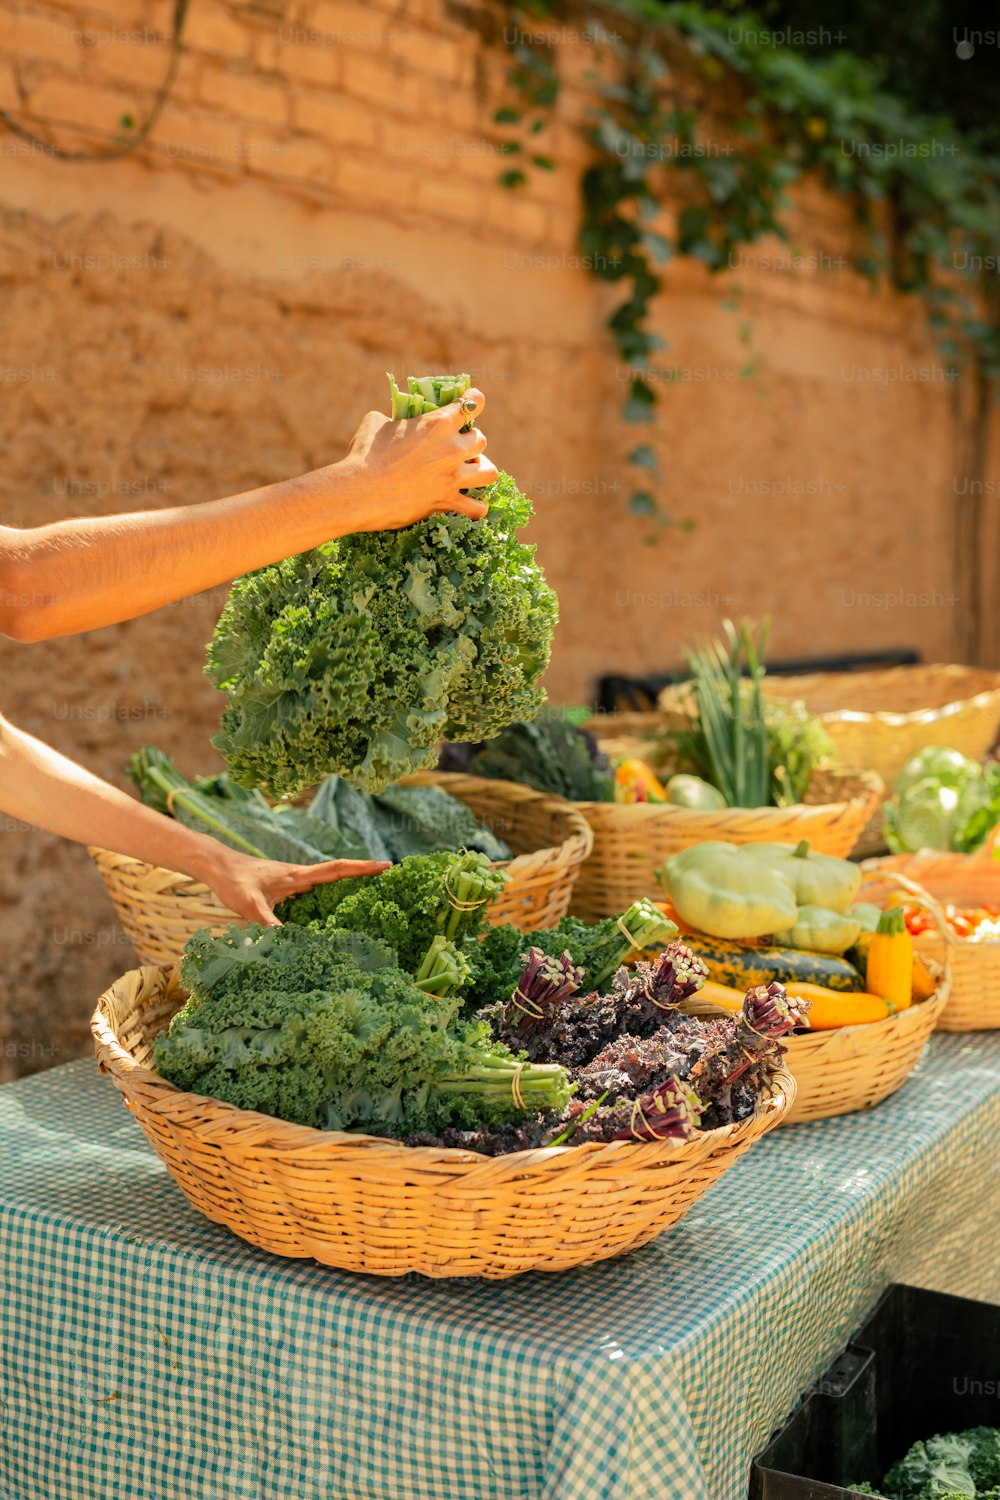 a person reaching for broccoli in a basket on a table